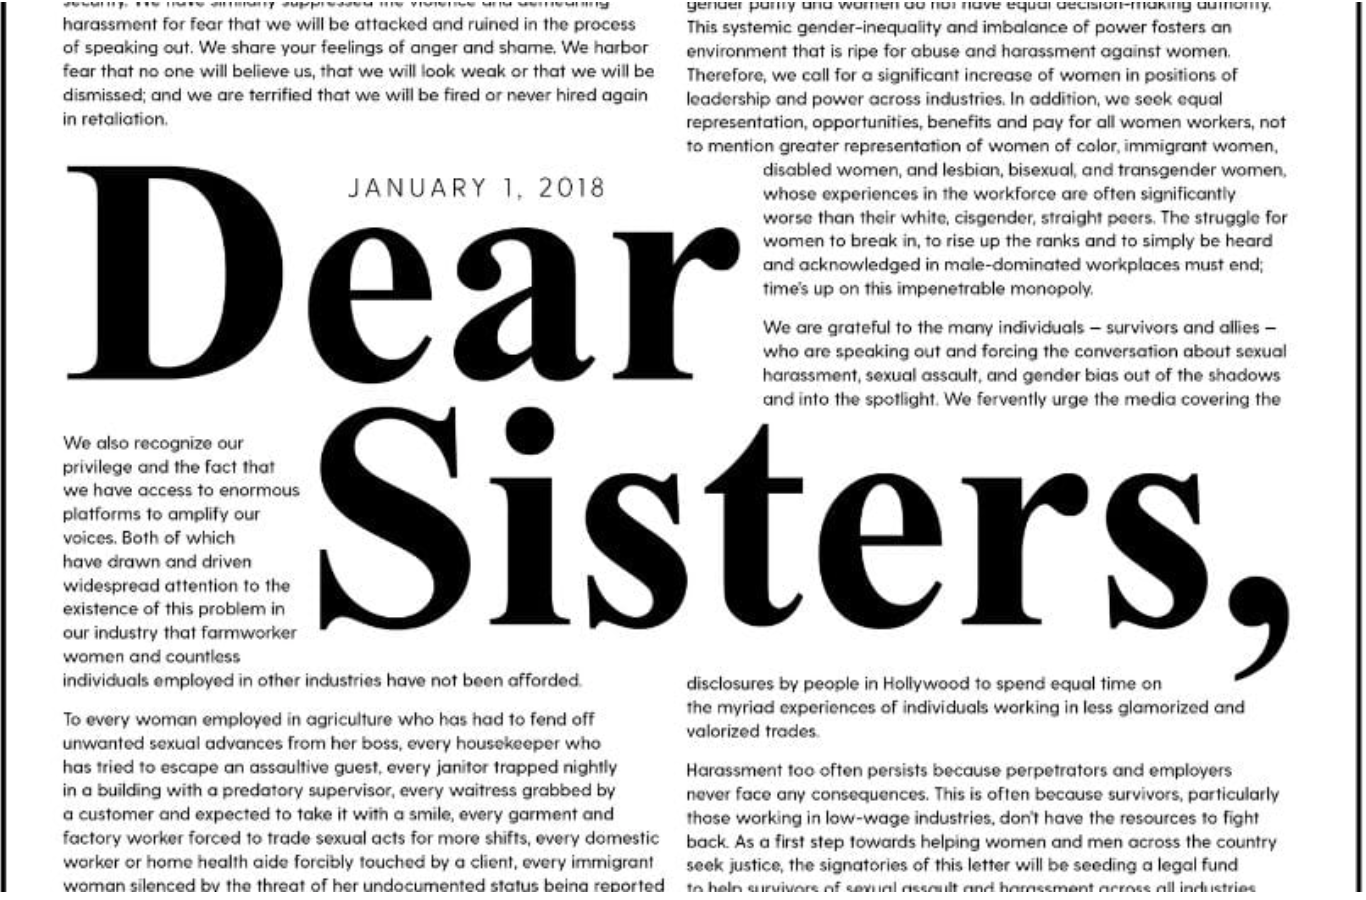 White backgrounf with black text. In the centre of the image the text reads ?Dear Sisters,? and is surrounded by the letter